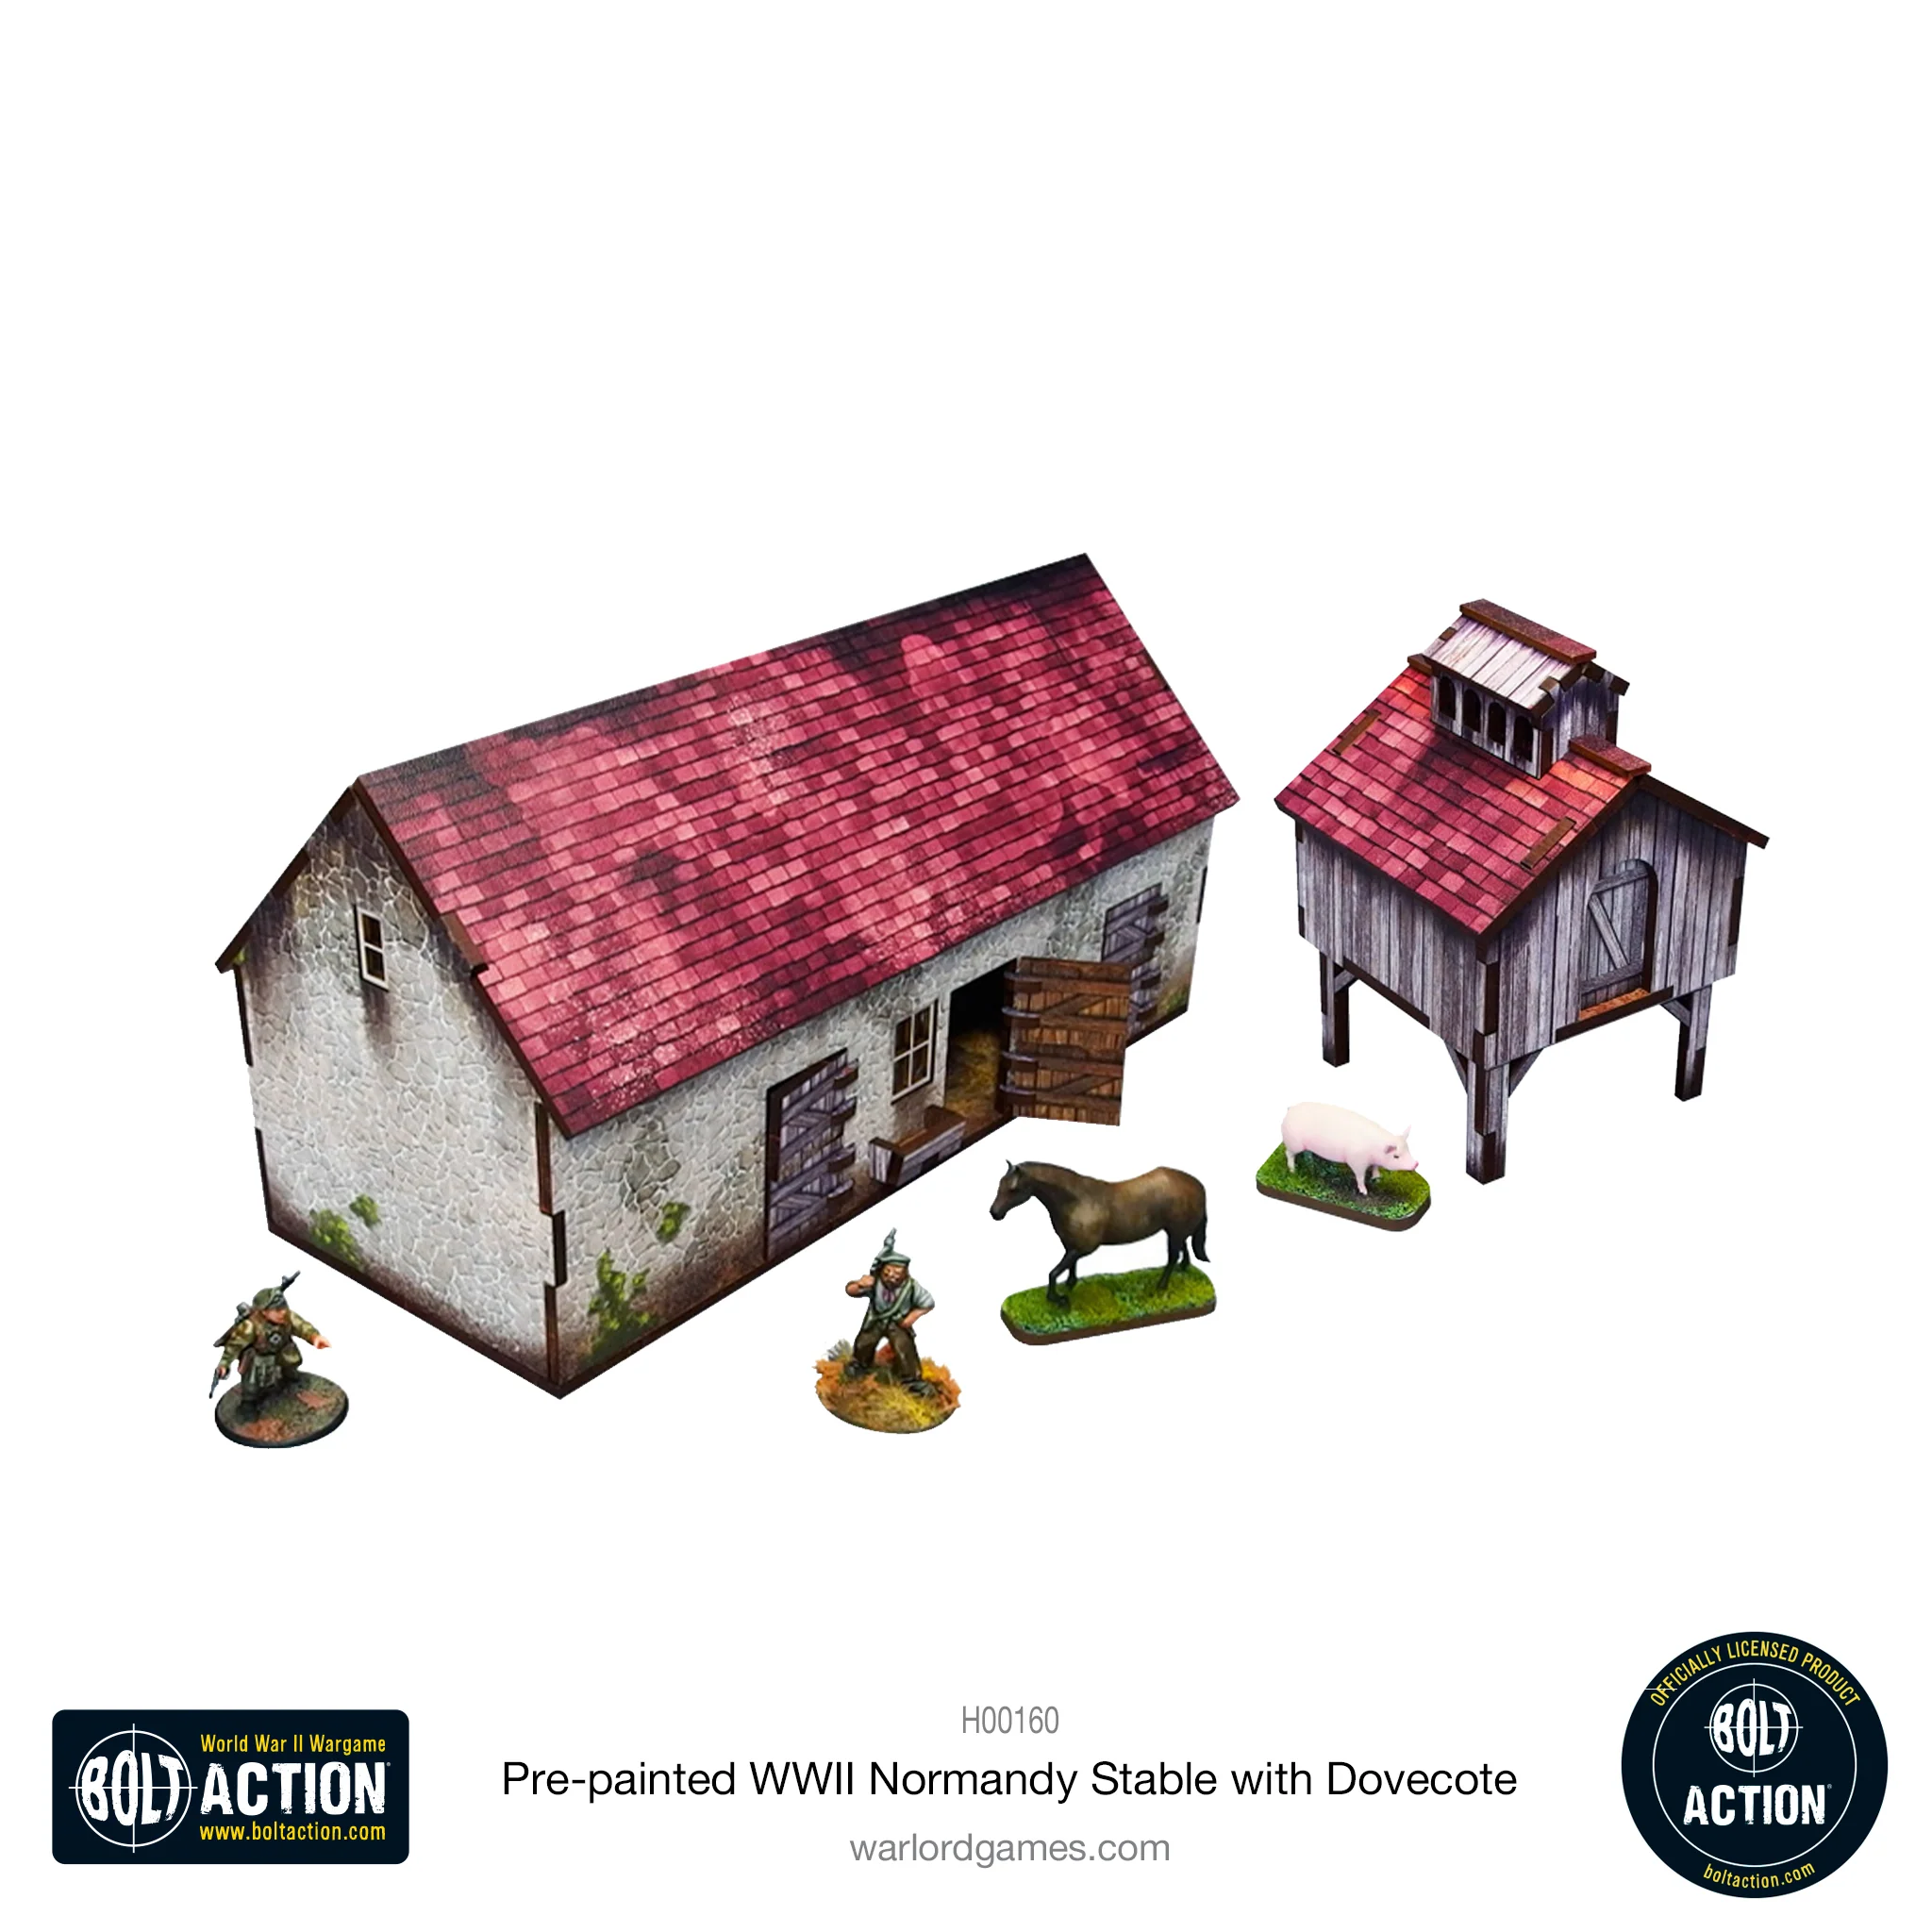 Bolt Action: Pre-Painted WWII Normandy Stable With Dovecote-1711116371-h3jsV.webp